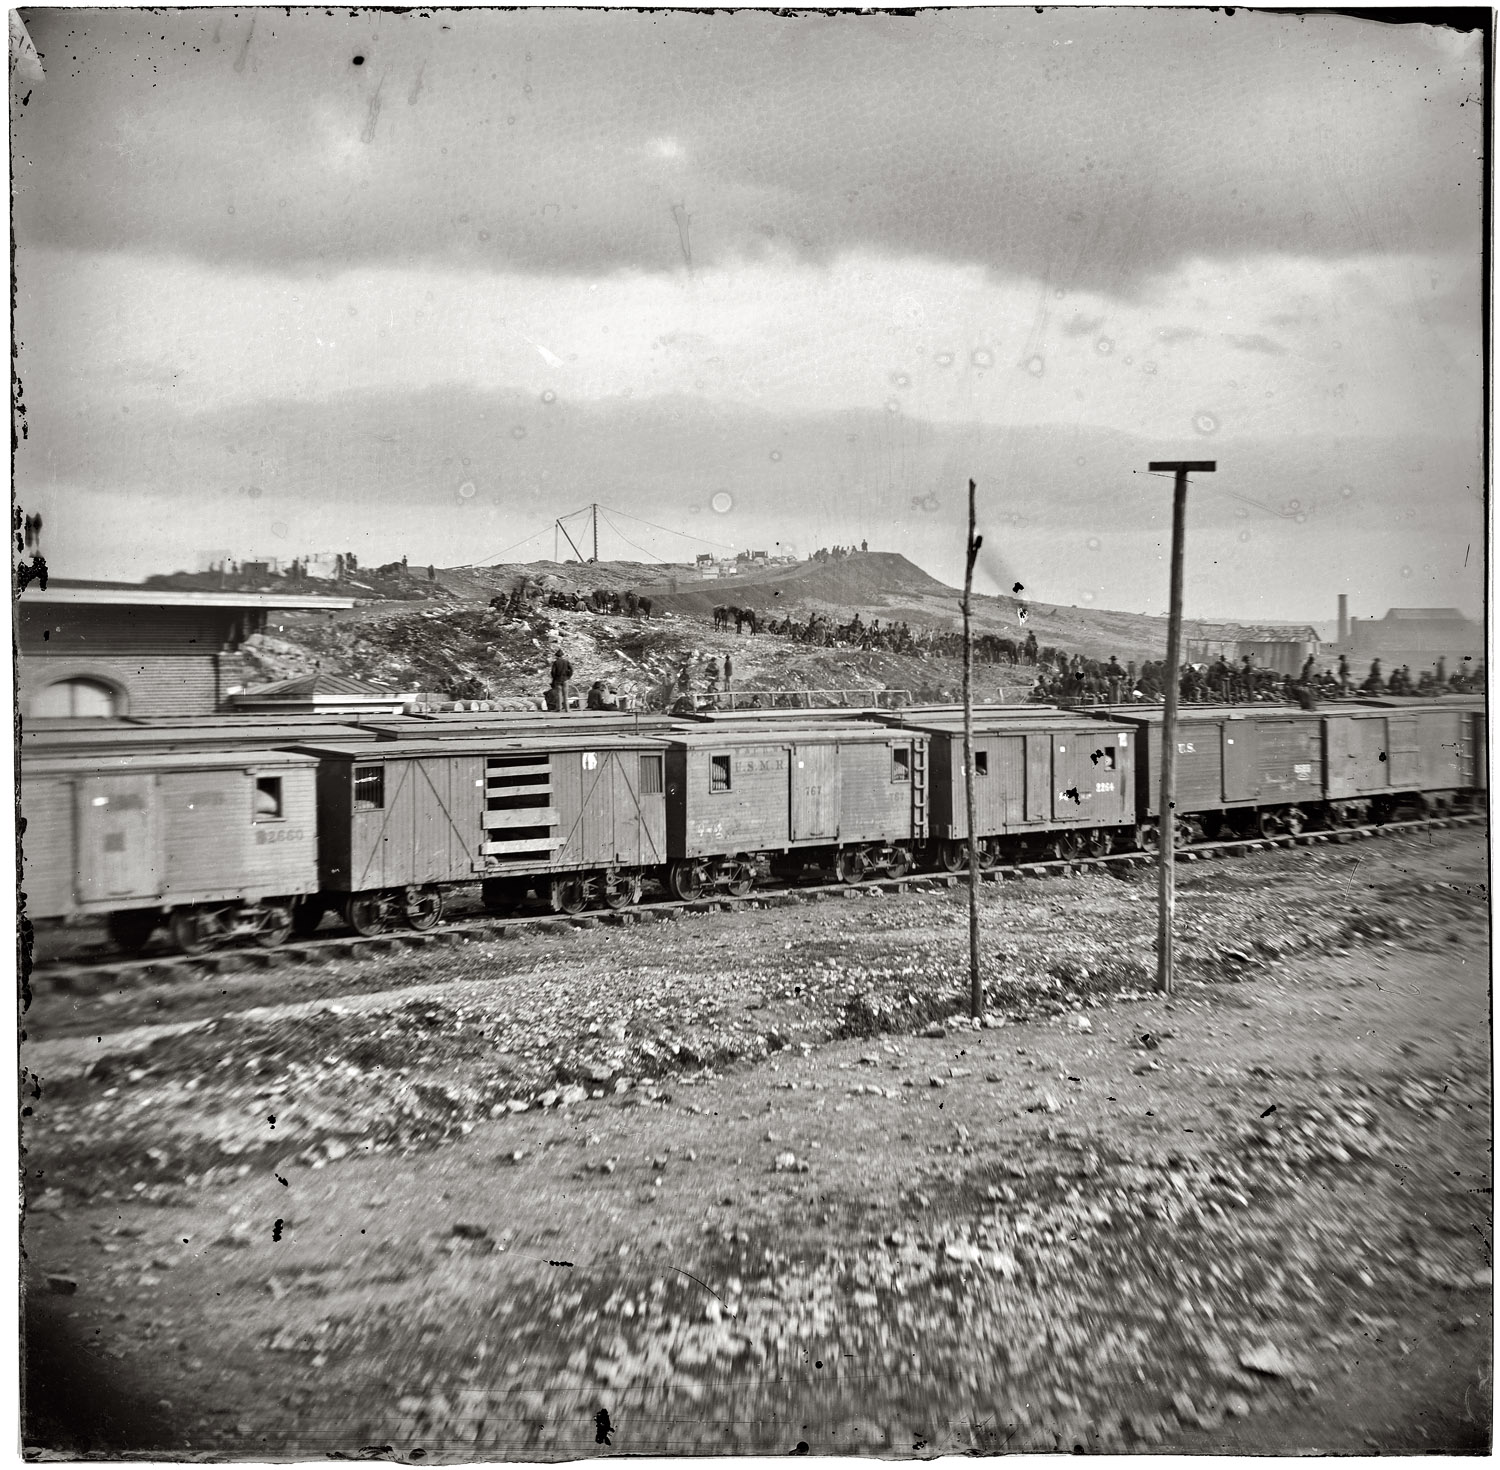 1864. Chattanooga, Tennessee. "Boxcars and depot with Federal cavalry guard beyond. From photographs of the War in the West. Battle of Chattanooga, September-November 1863. Photograph probably taken the following year, when Chattanooga was the base for Sherman's Atlanta campaign." Wet plate glass negative, half of stereo pair, photographer unknown. View full size.